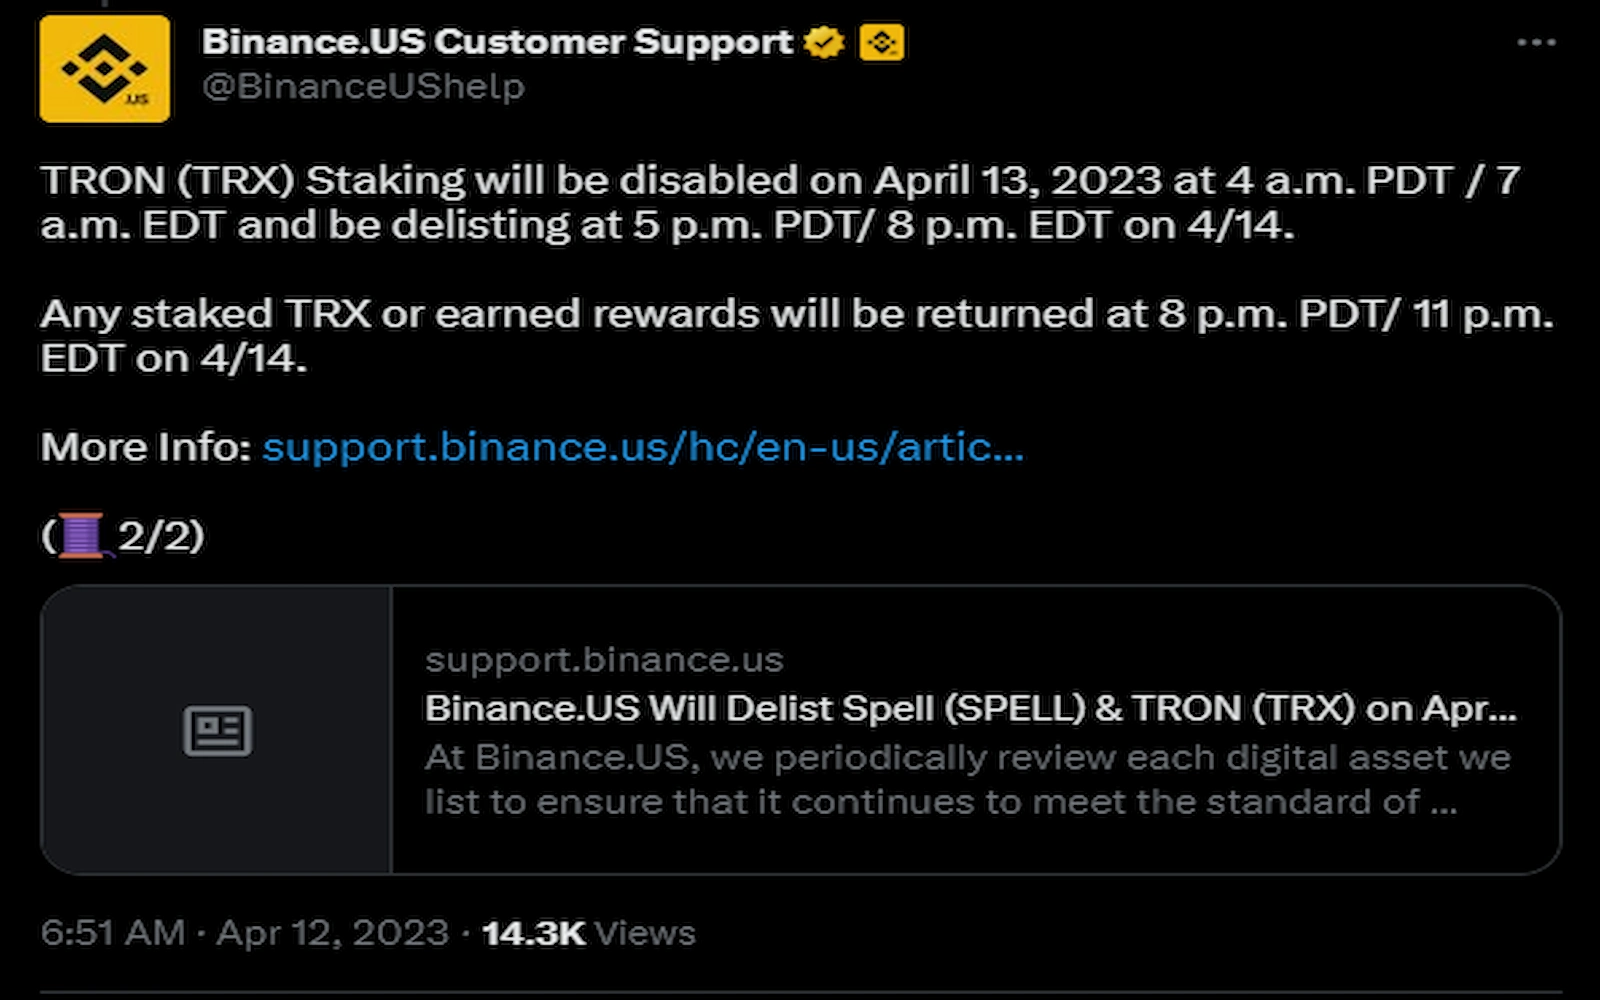 Binance.us boosts Tron (TRX) by listing it on their platform in April, increasing Justin Sun’s influence on the cryptocurrency market.